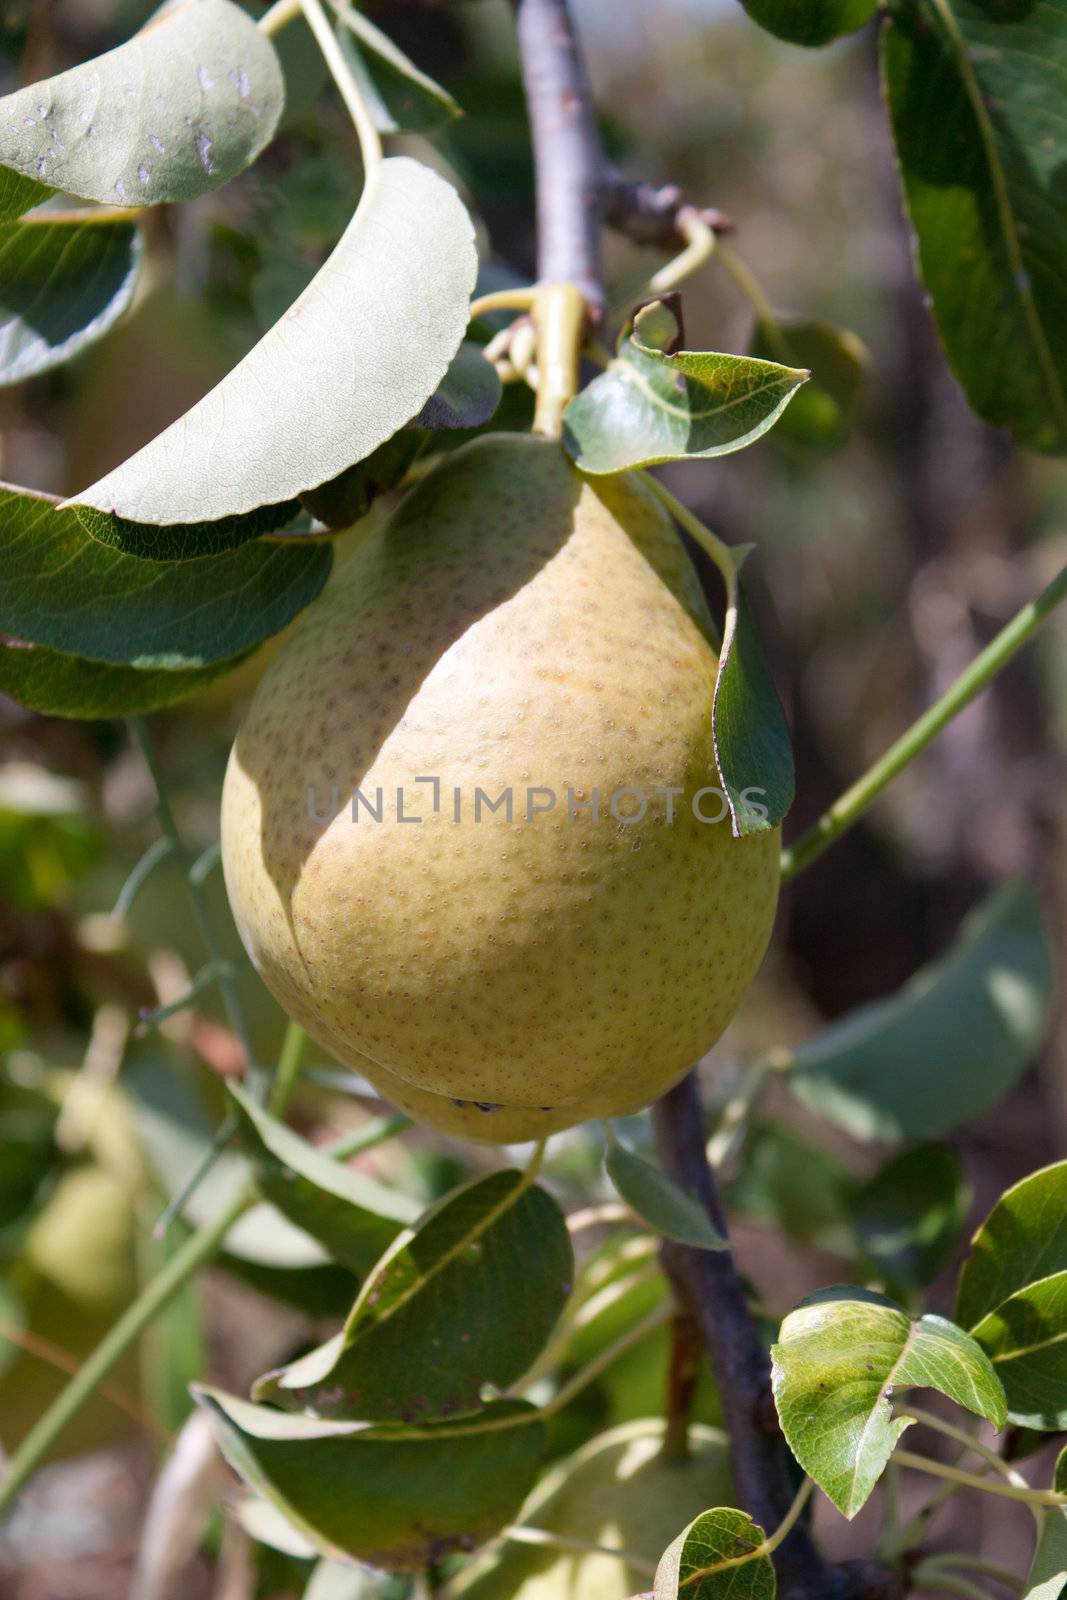 Tasty pears on the tree, close-up view